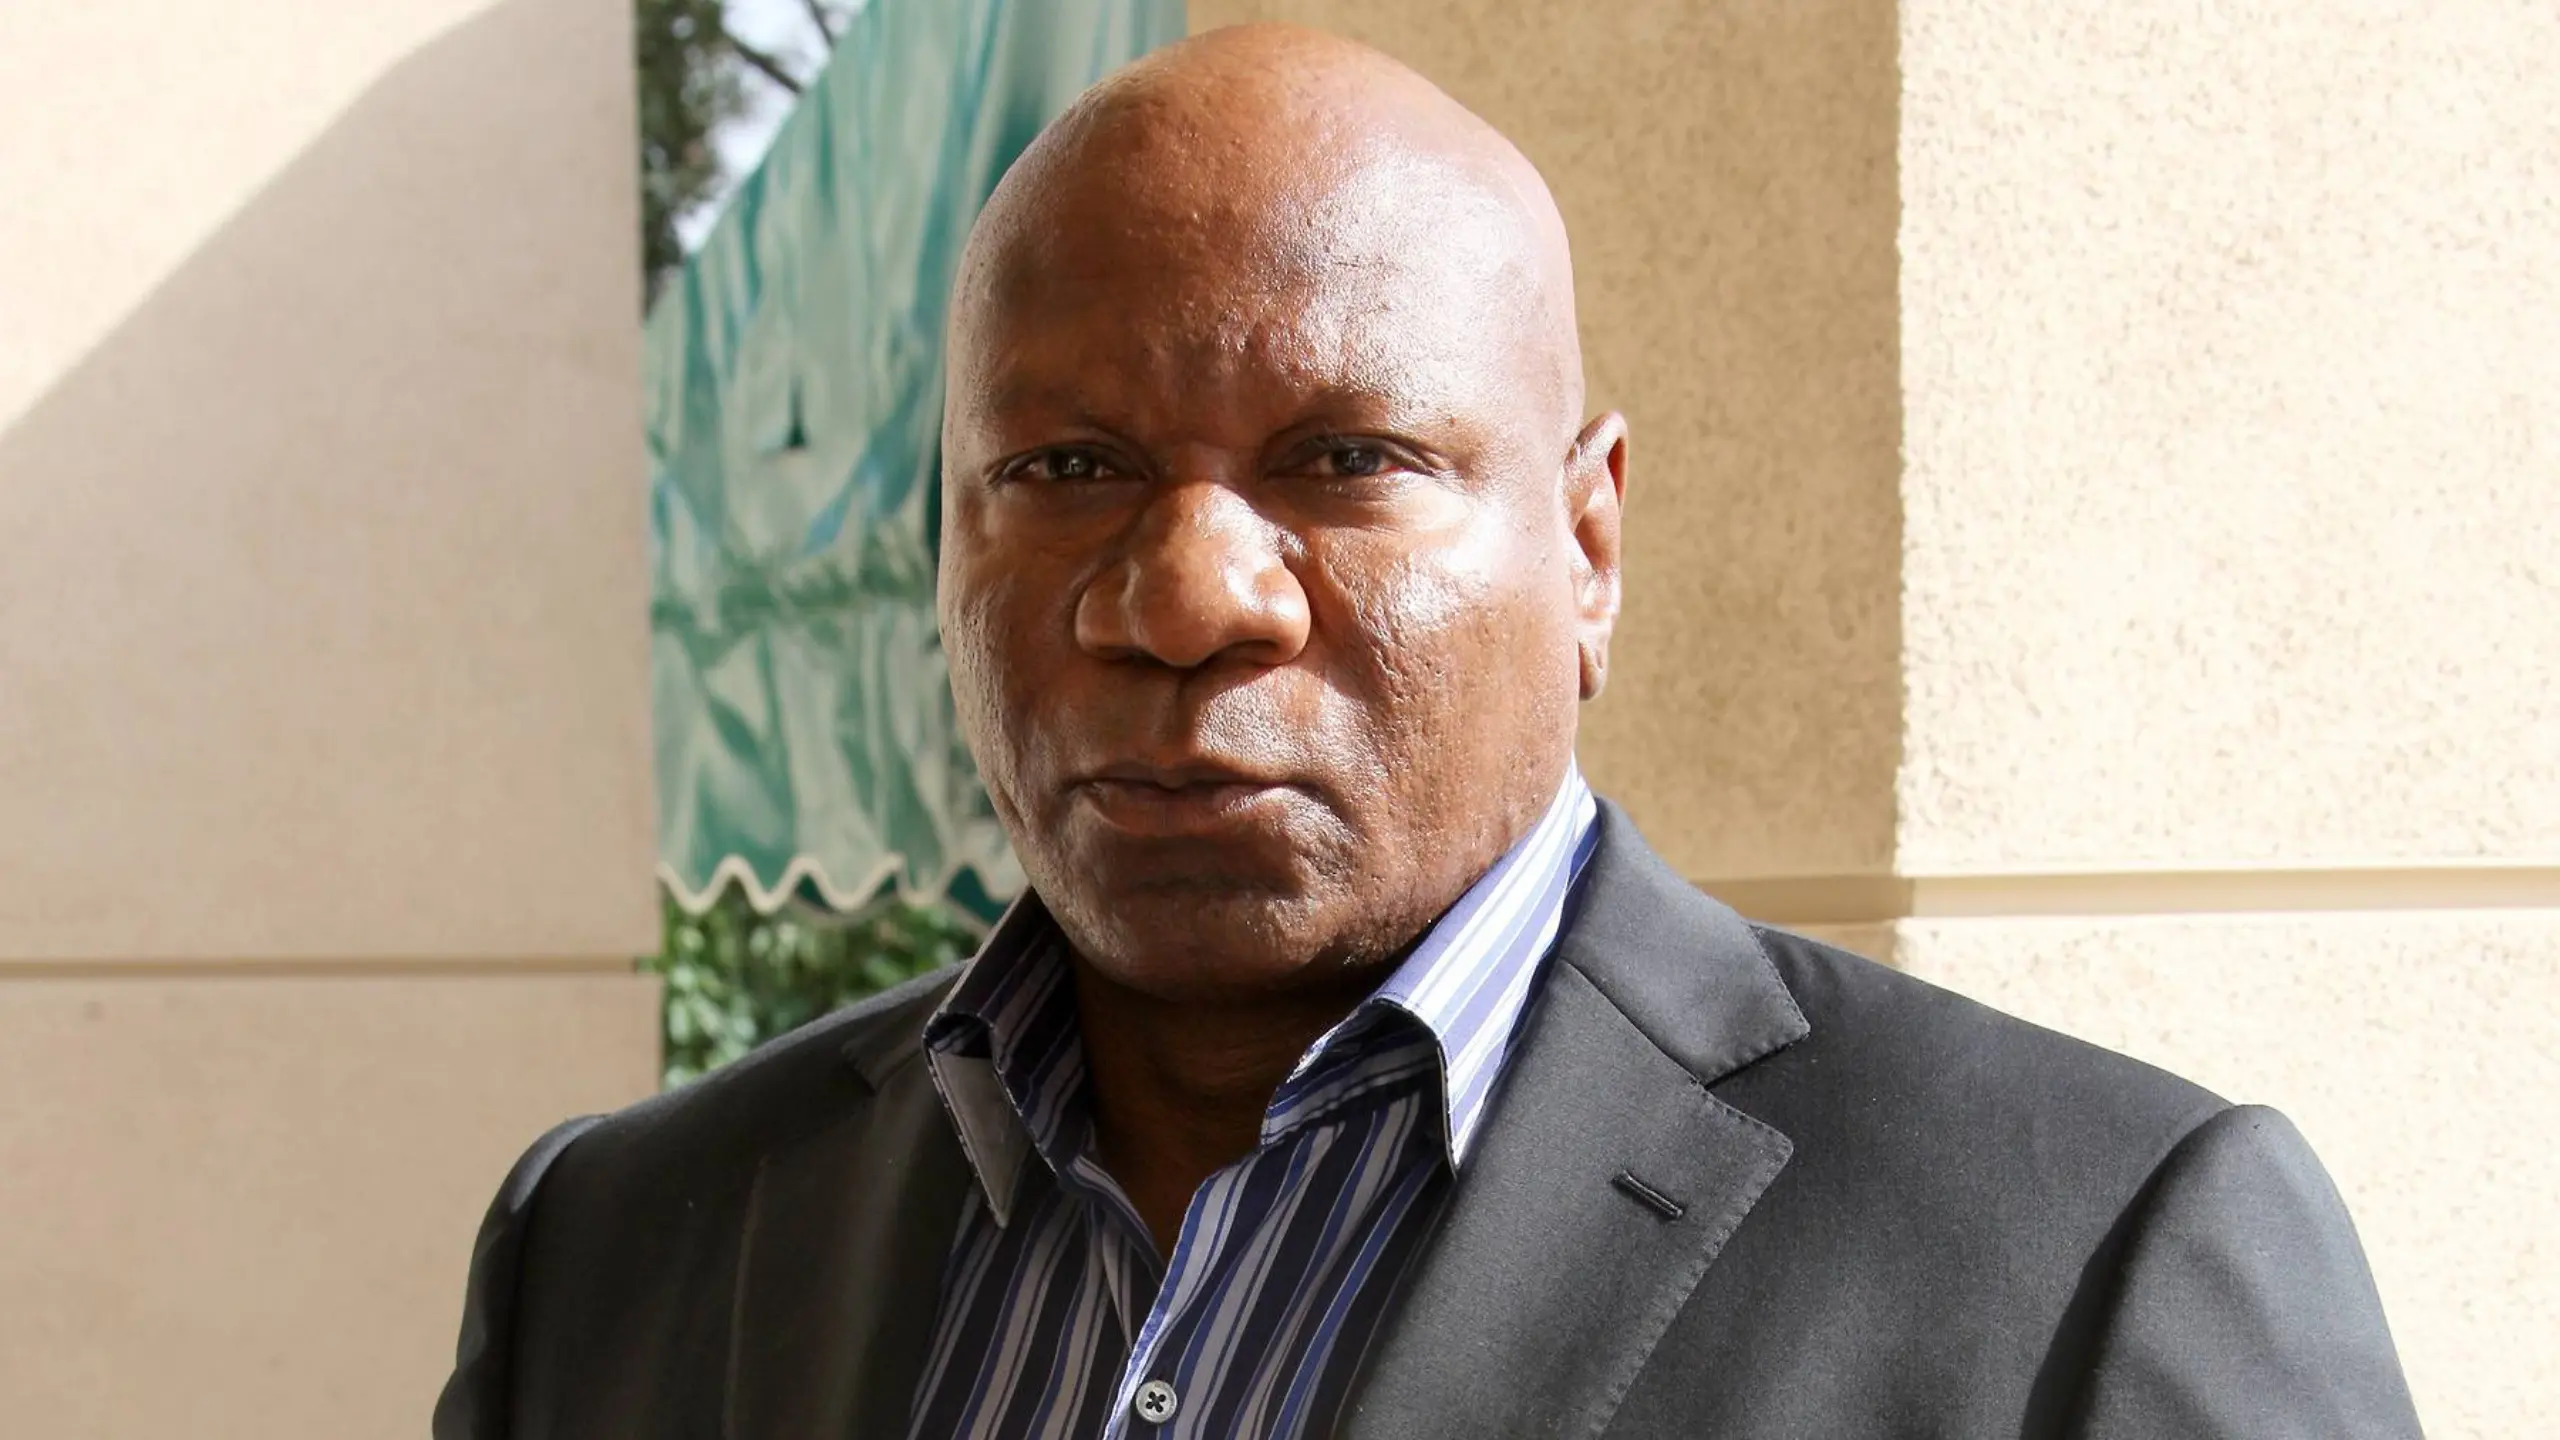 Ving Rhames The Talented Actor Who Captivates Audiences